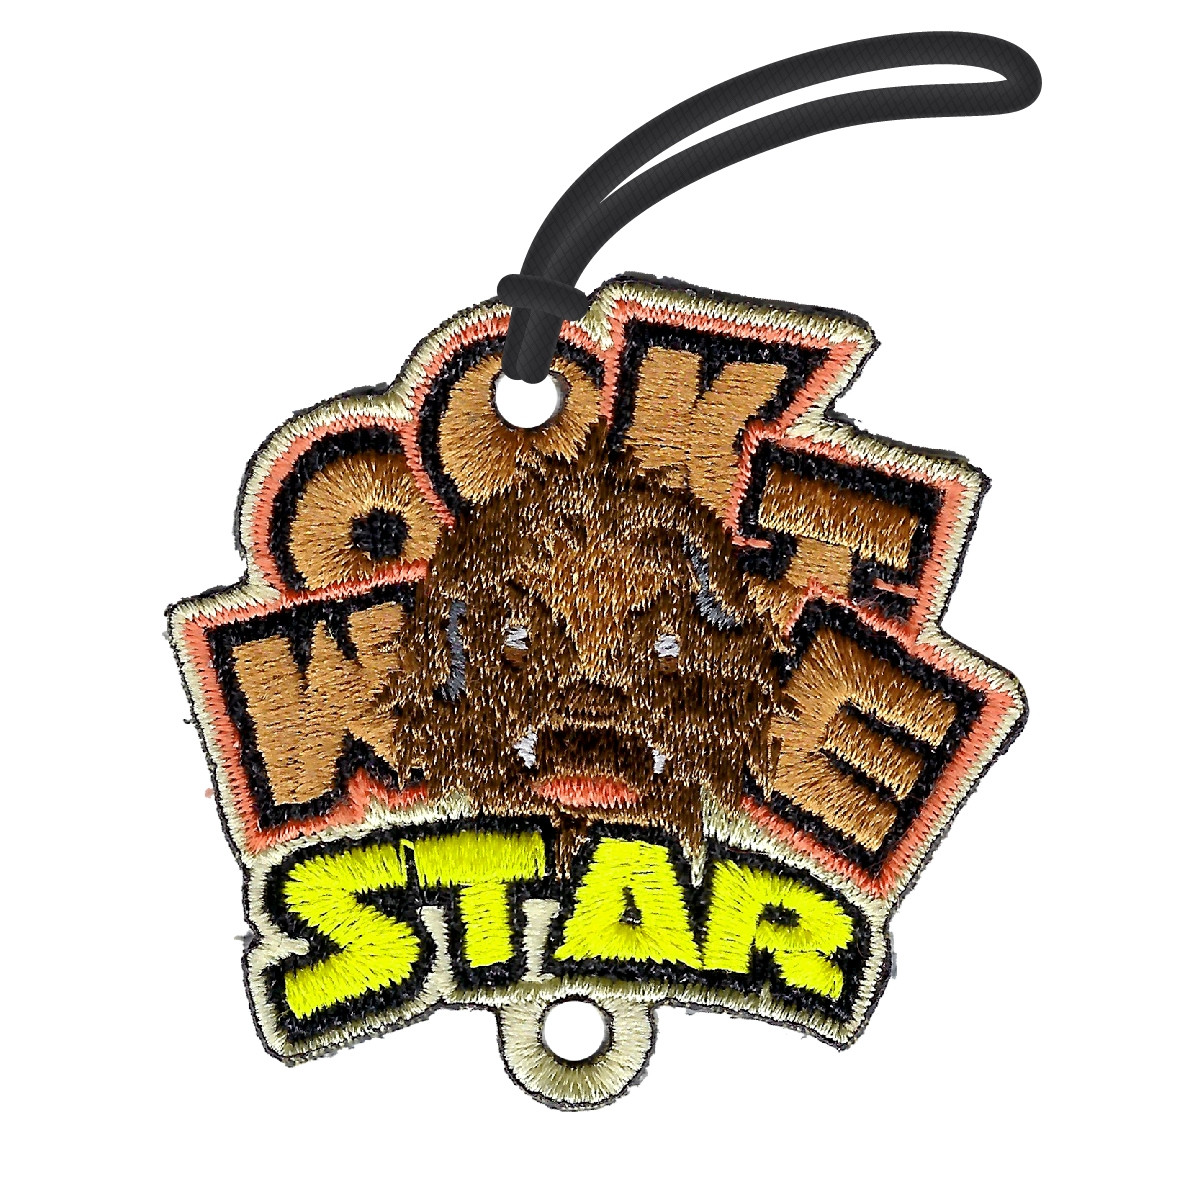 PATCH Tag - Wookie Star